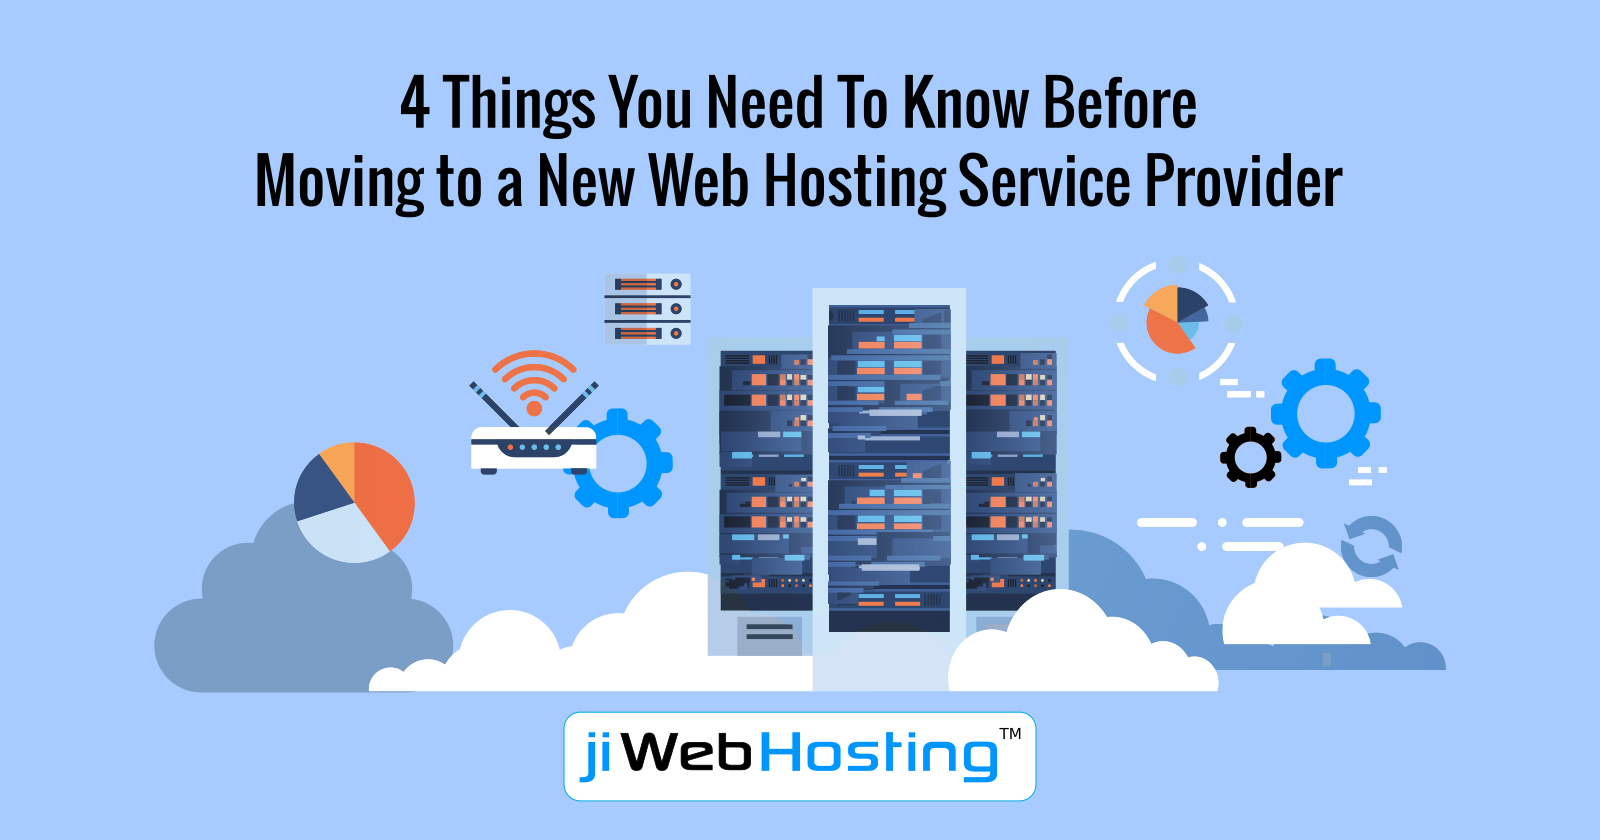 4 Things You Need To Know Before Moving to a New Web Hosting Service Provider